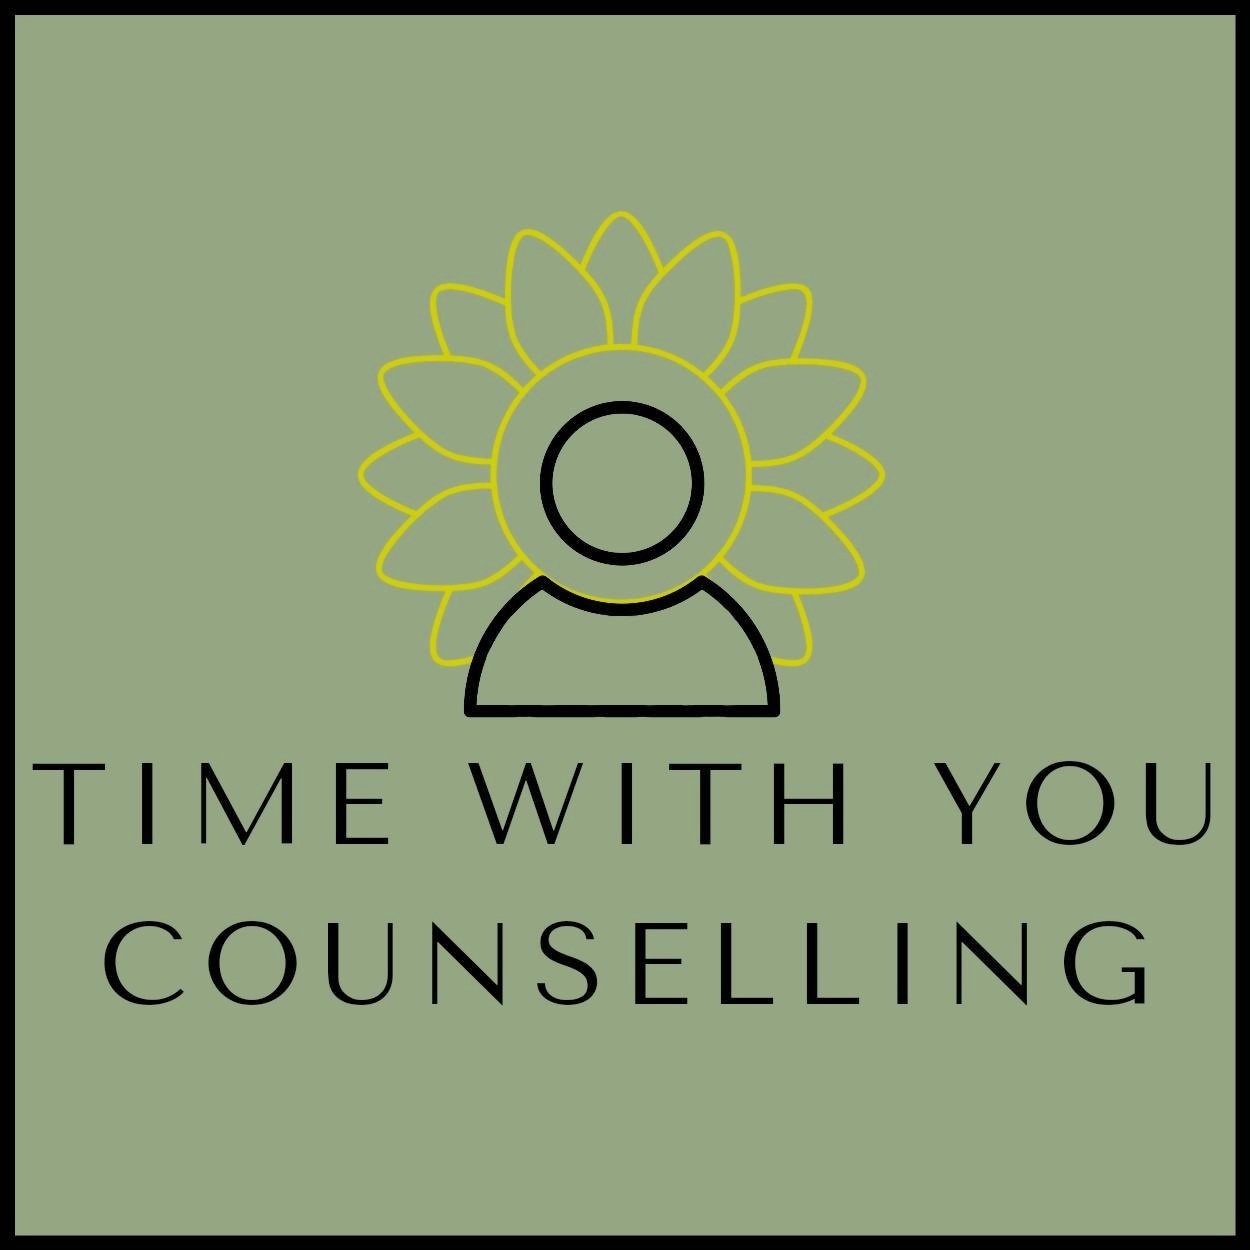 Time With You counselling